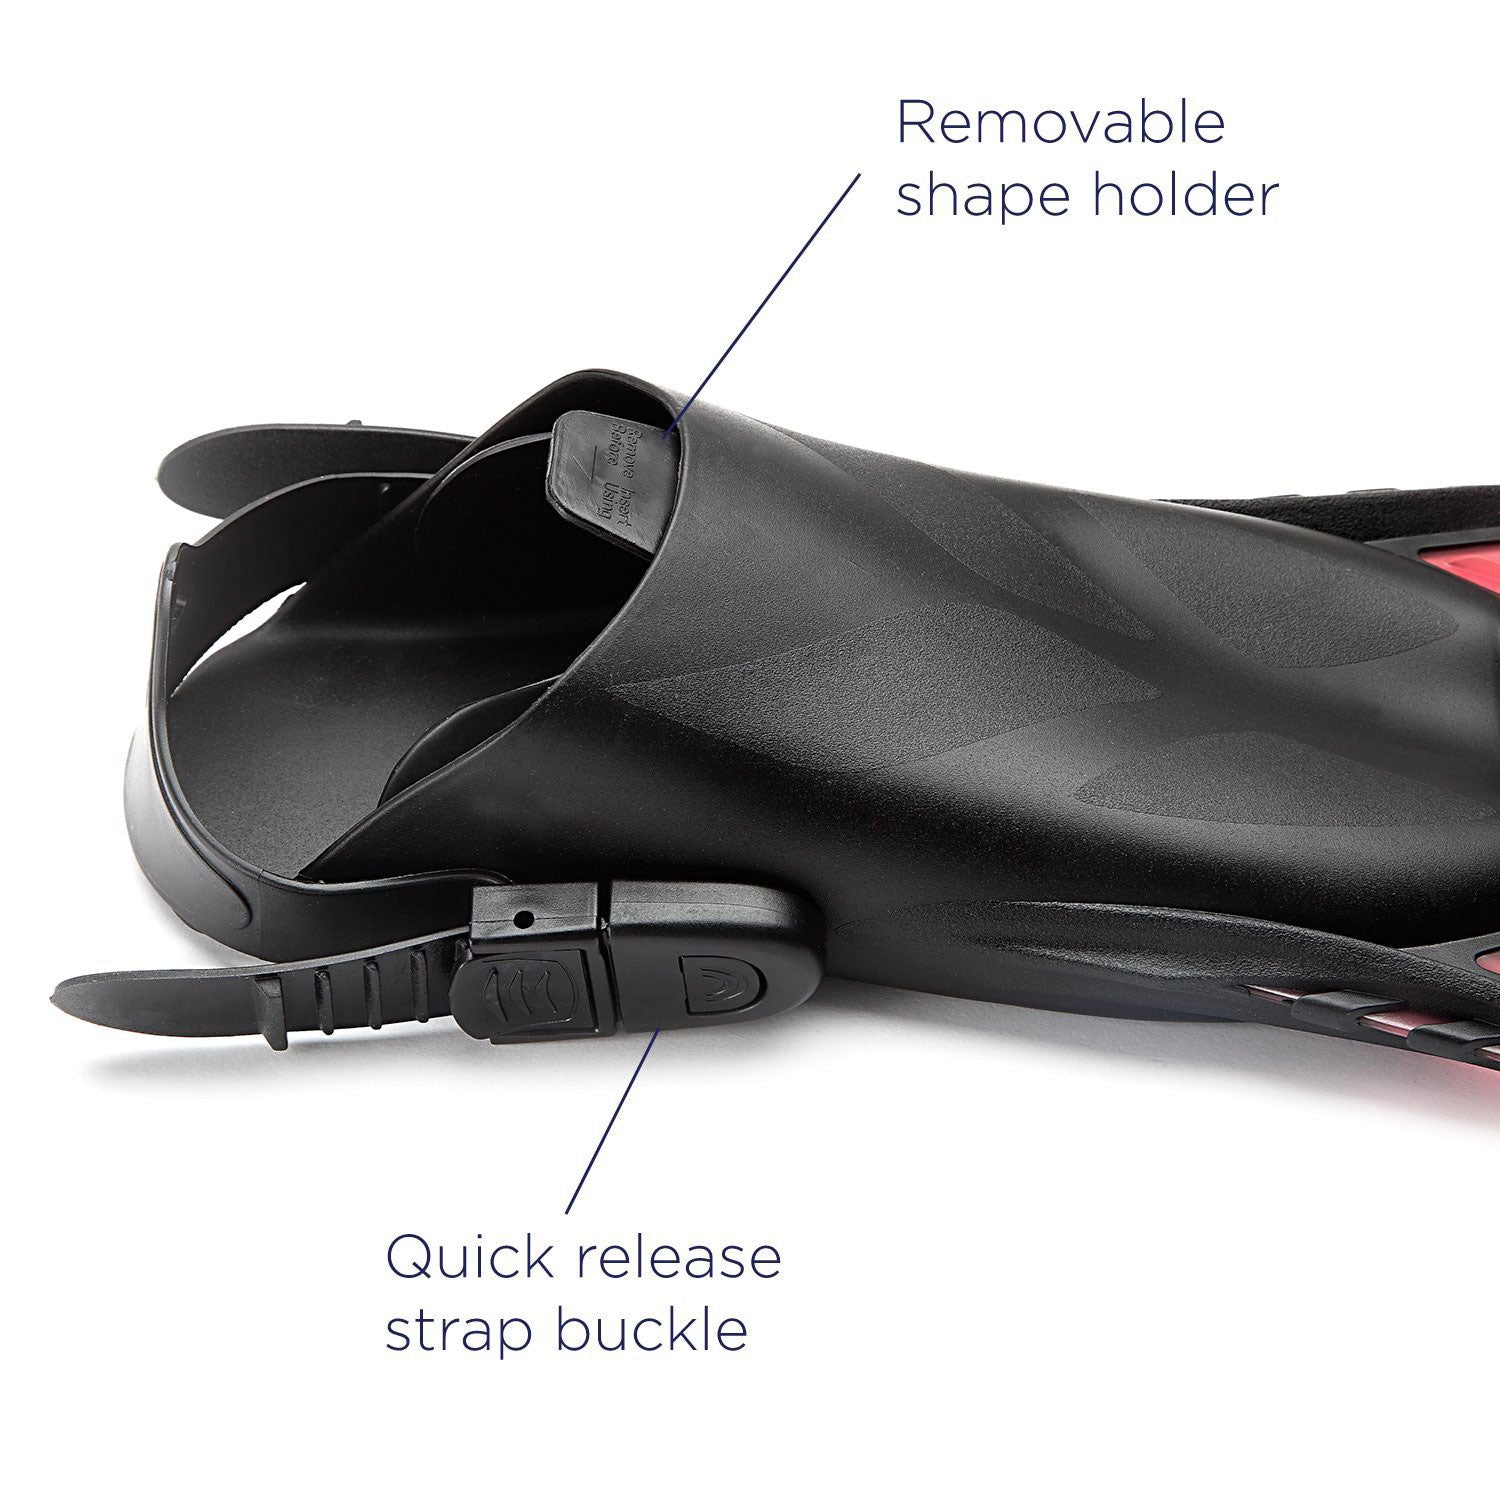 Snorkelling & Diving Fins / Flippers - Adults